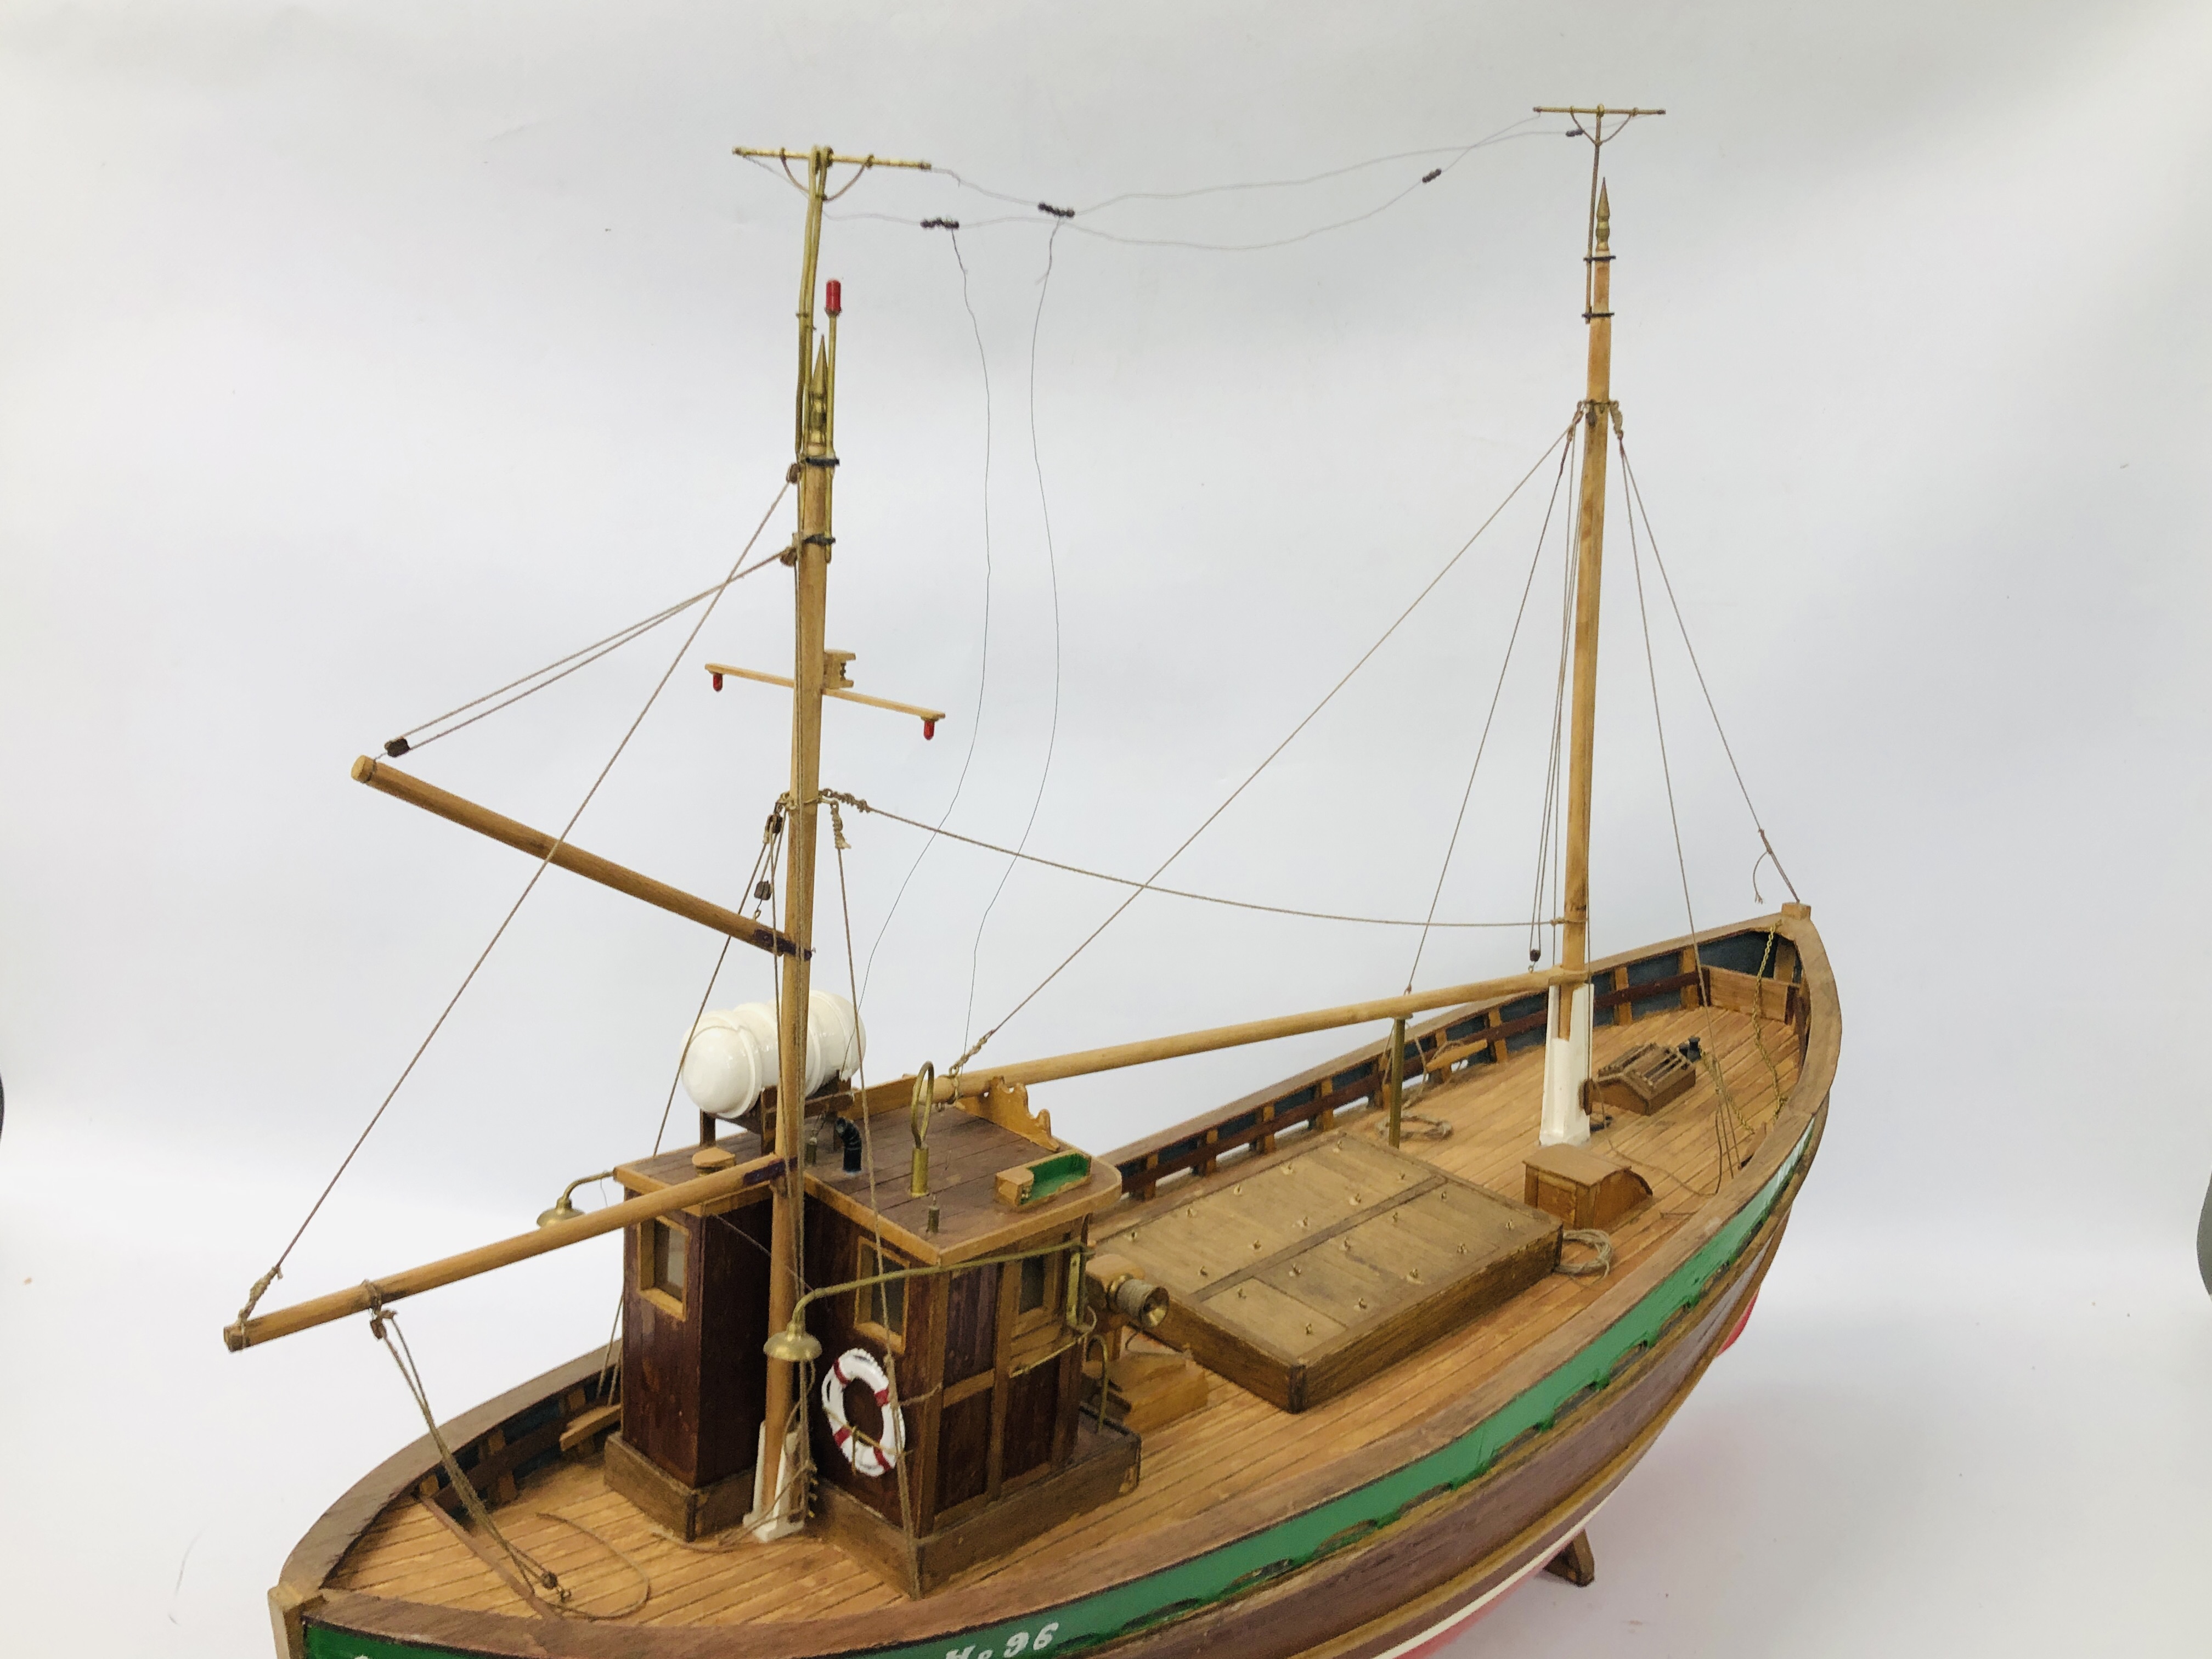 A VINTAGE HAND BUILT WOODEN MODEL OF A FISHING TRAWLER "EILEEN" NO. 96 LENGTH 85CM. HEIGHT 66CM. - Image 10 of 11